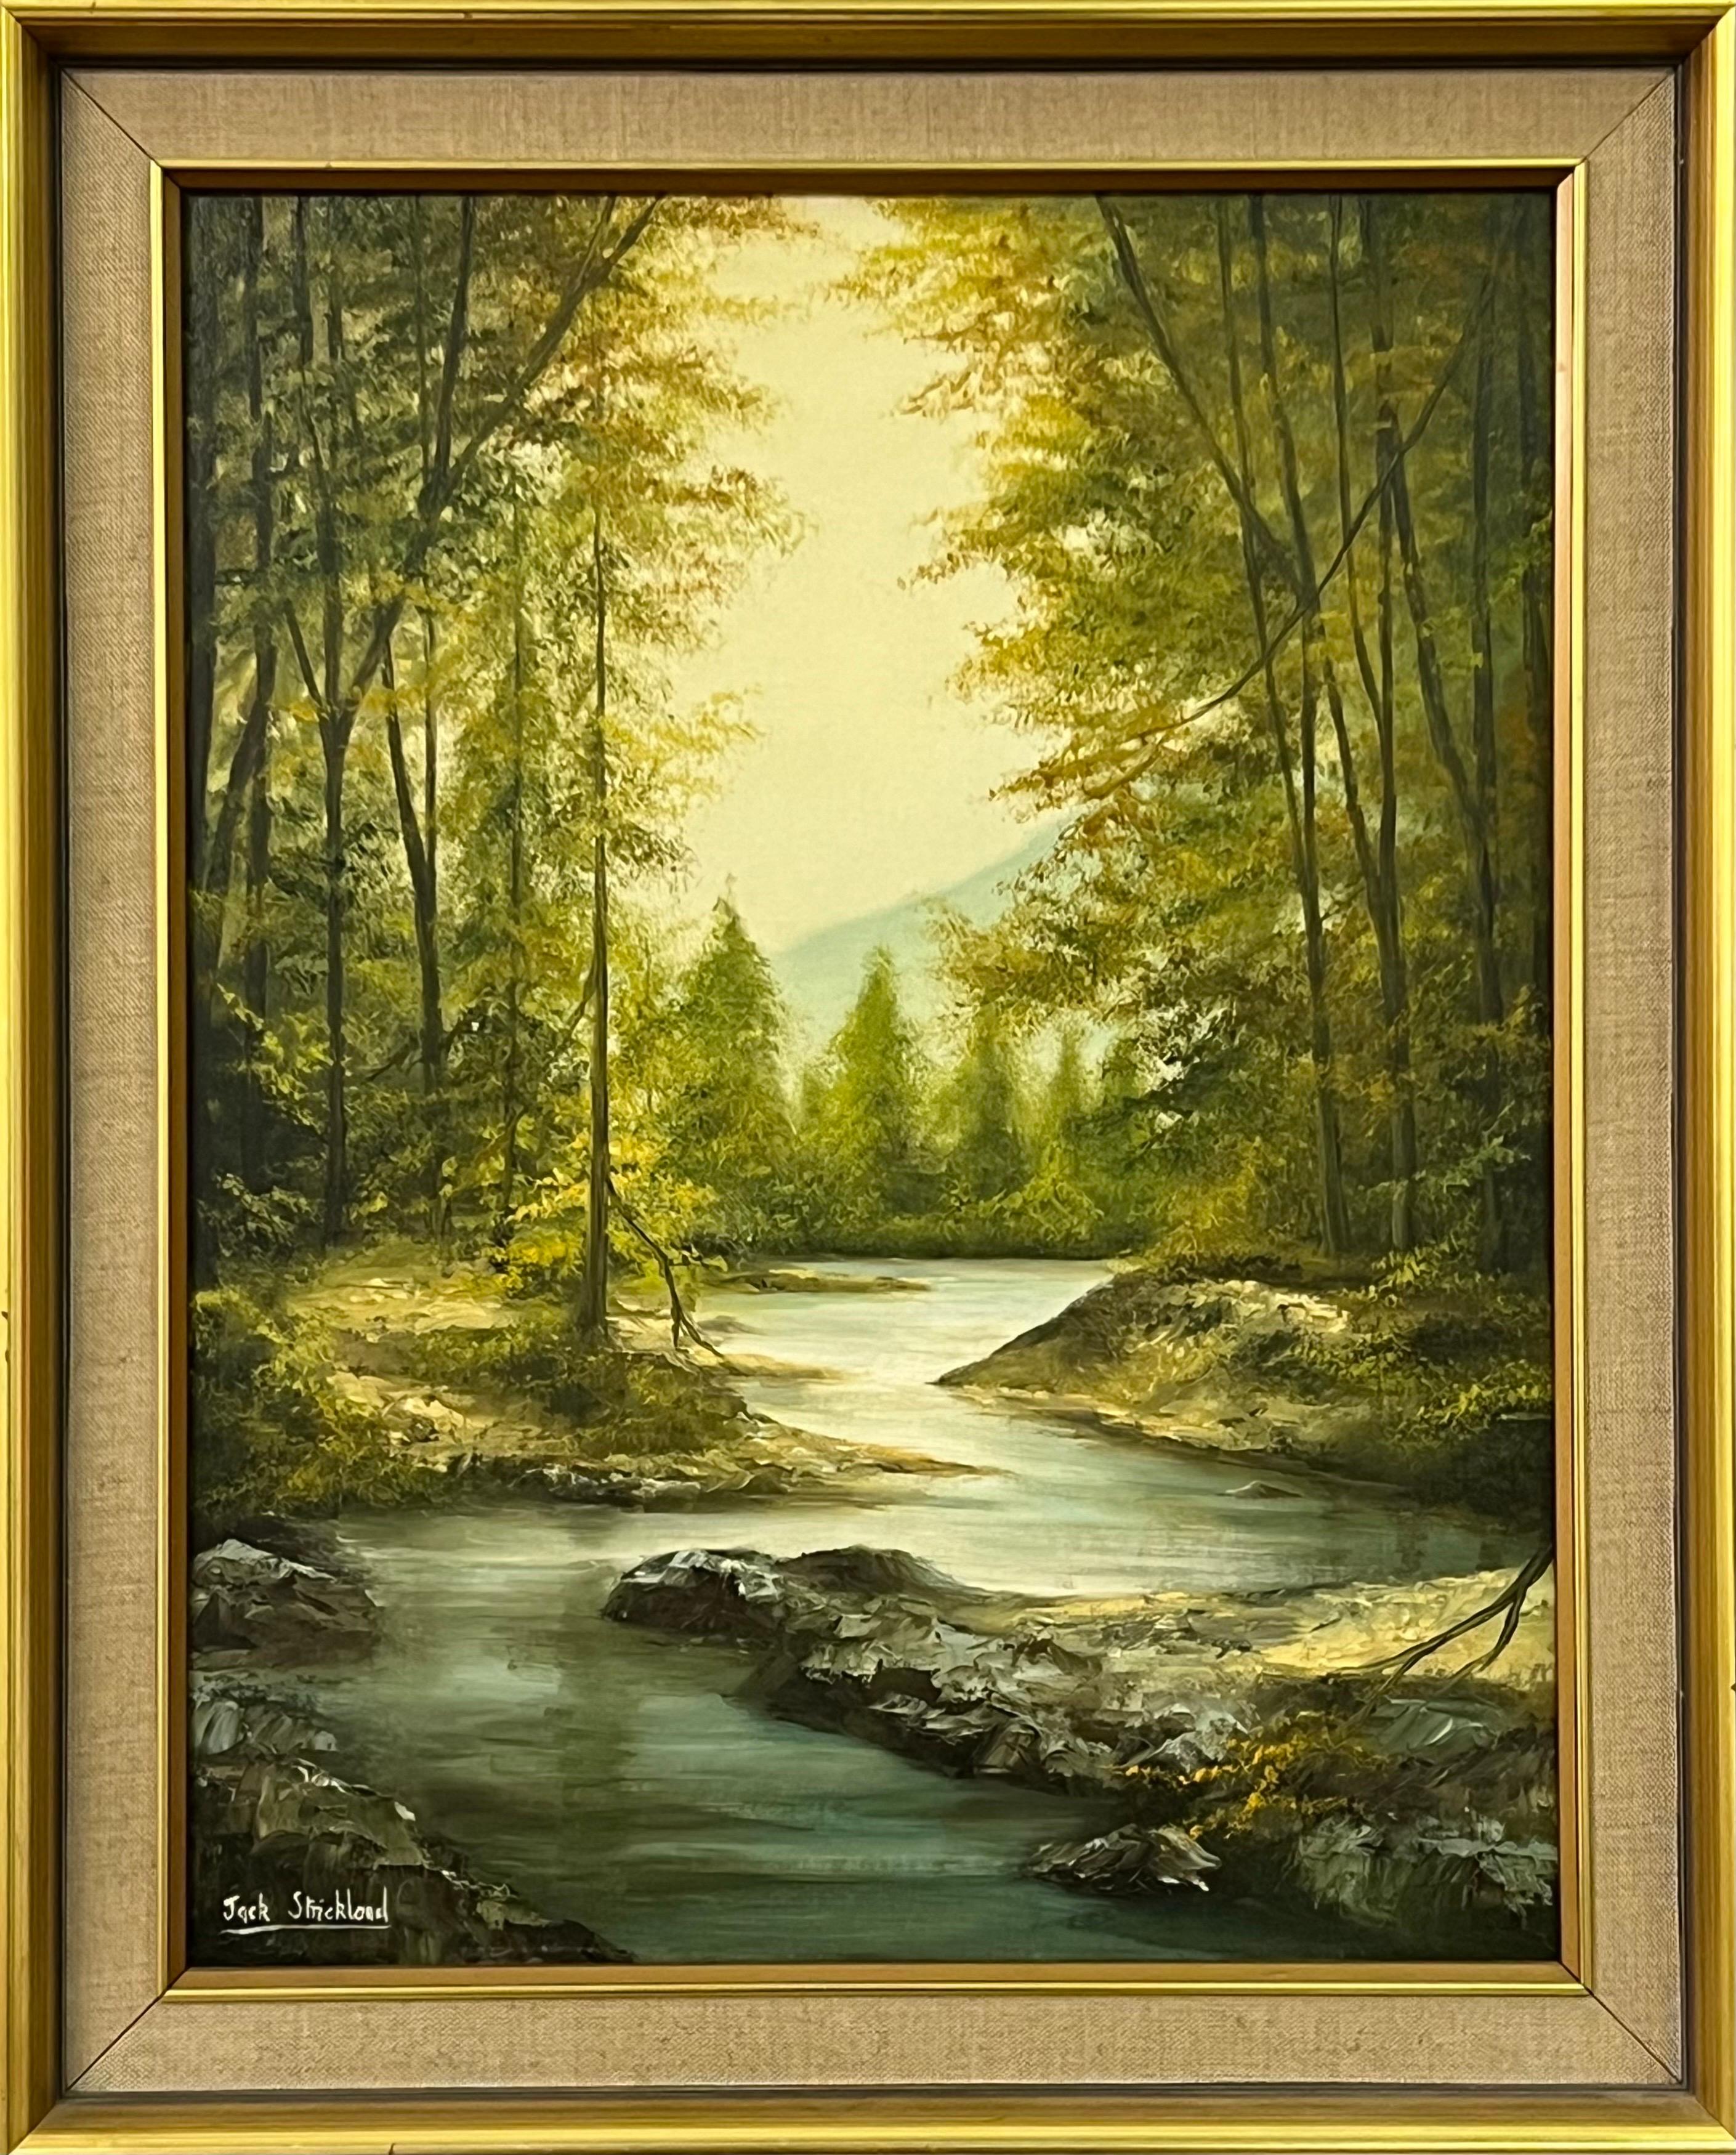 Jack Strickland Figurative Painting - Arctic Stream in Forest Landscape with Lush Green by 20th Century British Artist